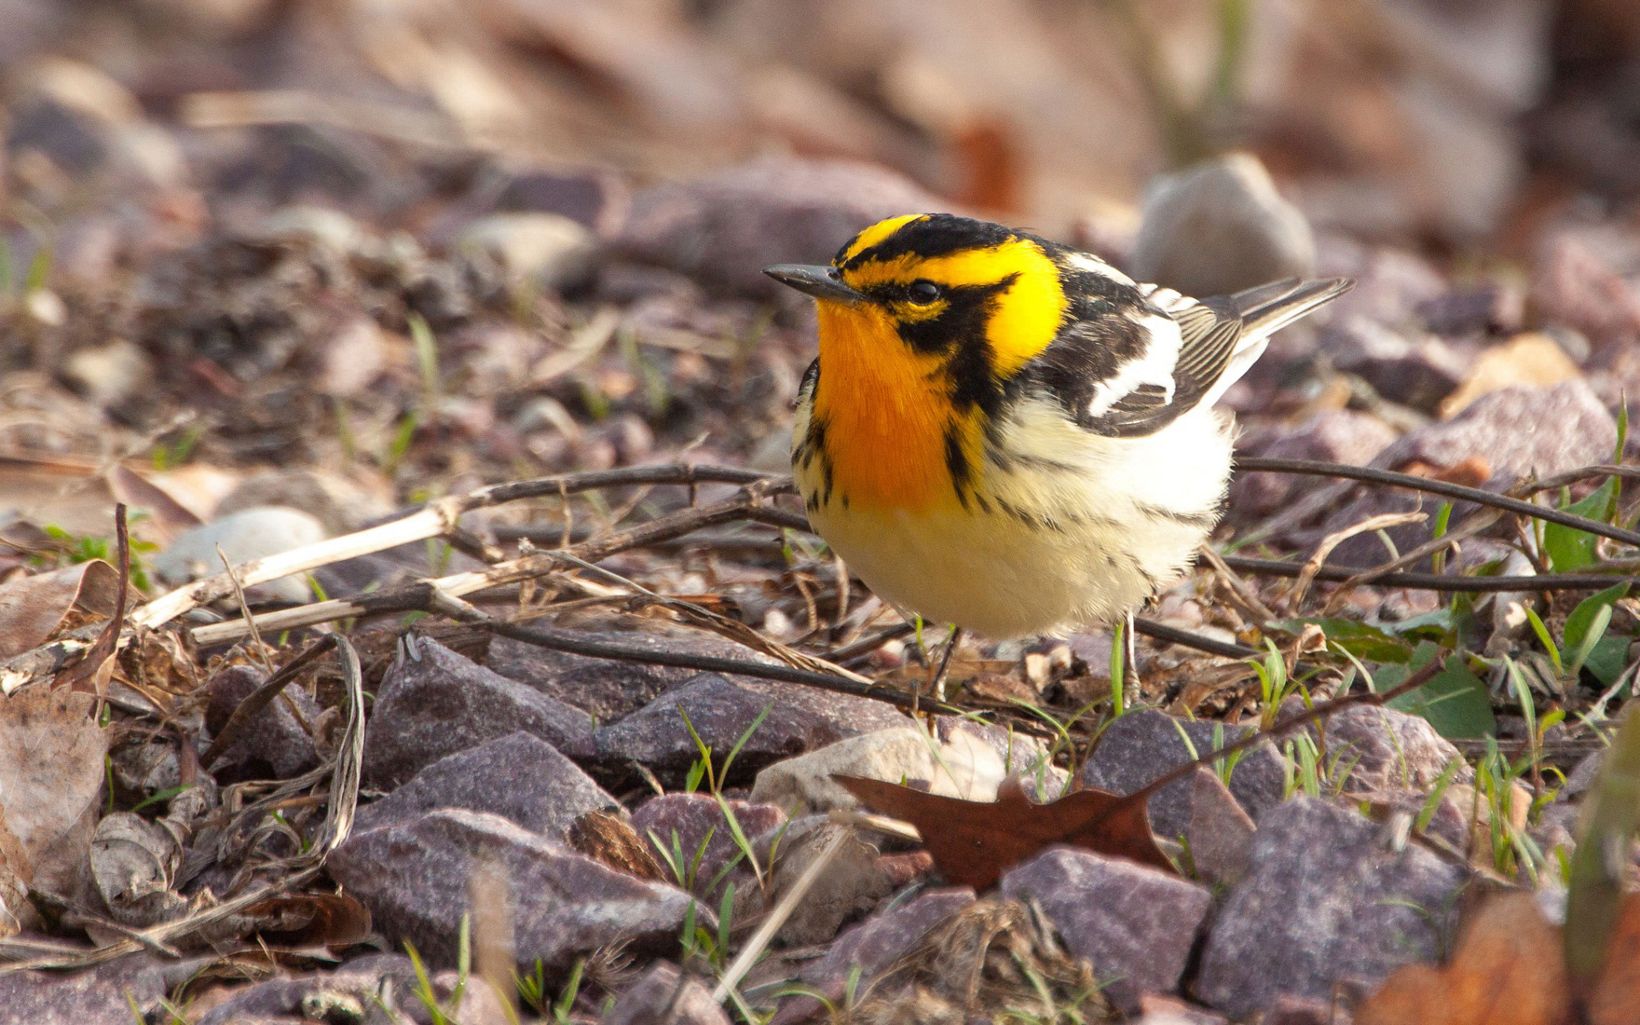 Blackburnian Warbler The vivid orange color of this bird is usually best seen in the breeding of males. © Steve S. Meyer